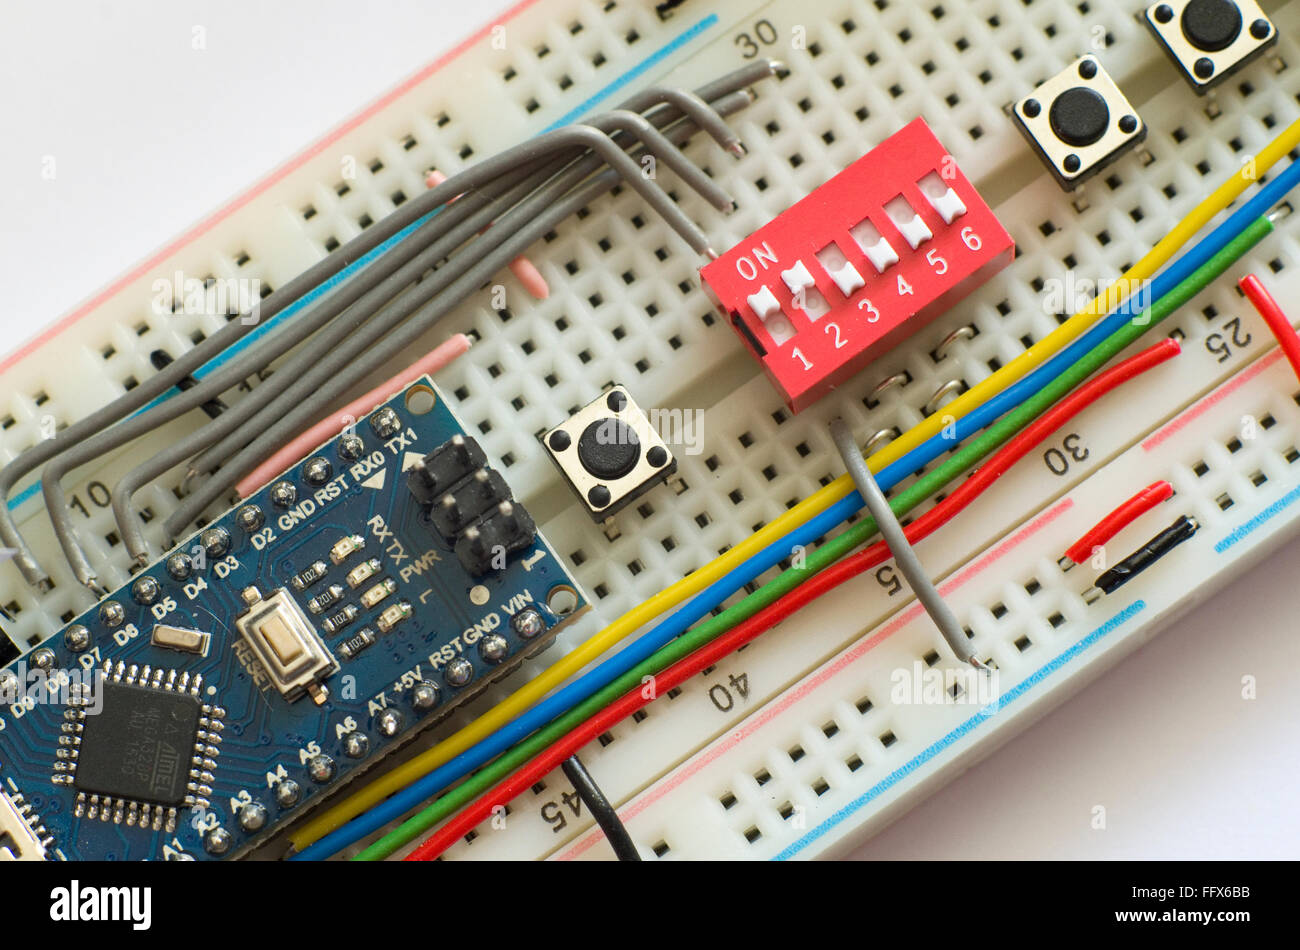 Electronics prototyping board (breadboard) with an Arduino Pro Mini clone and an assortment of switches and wires. Stock Photo